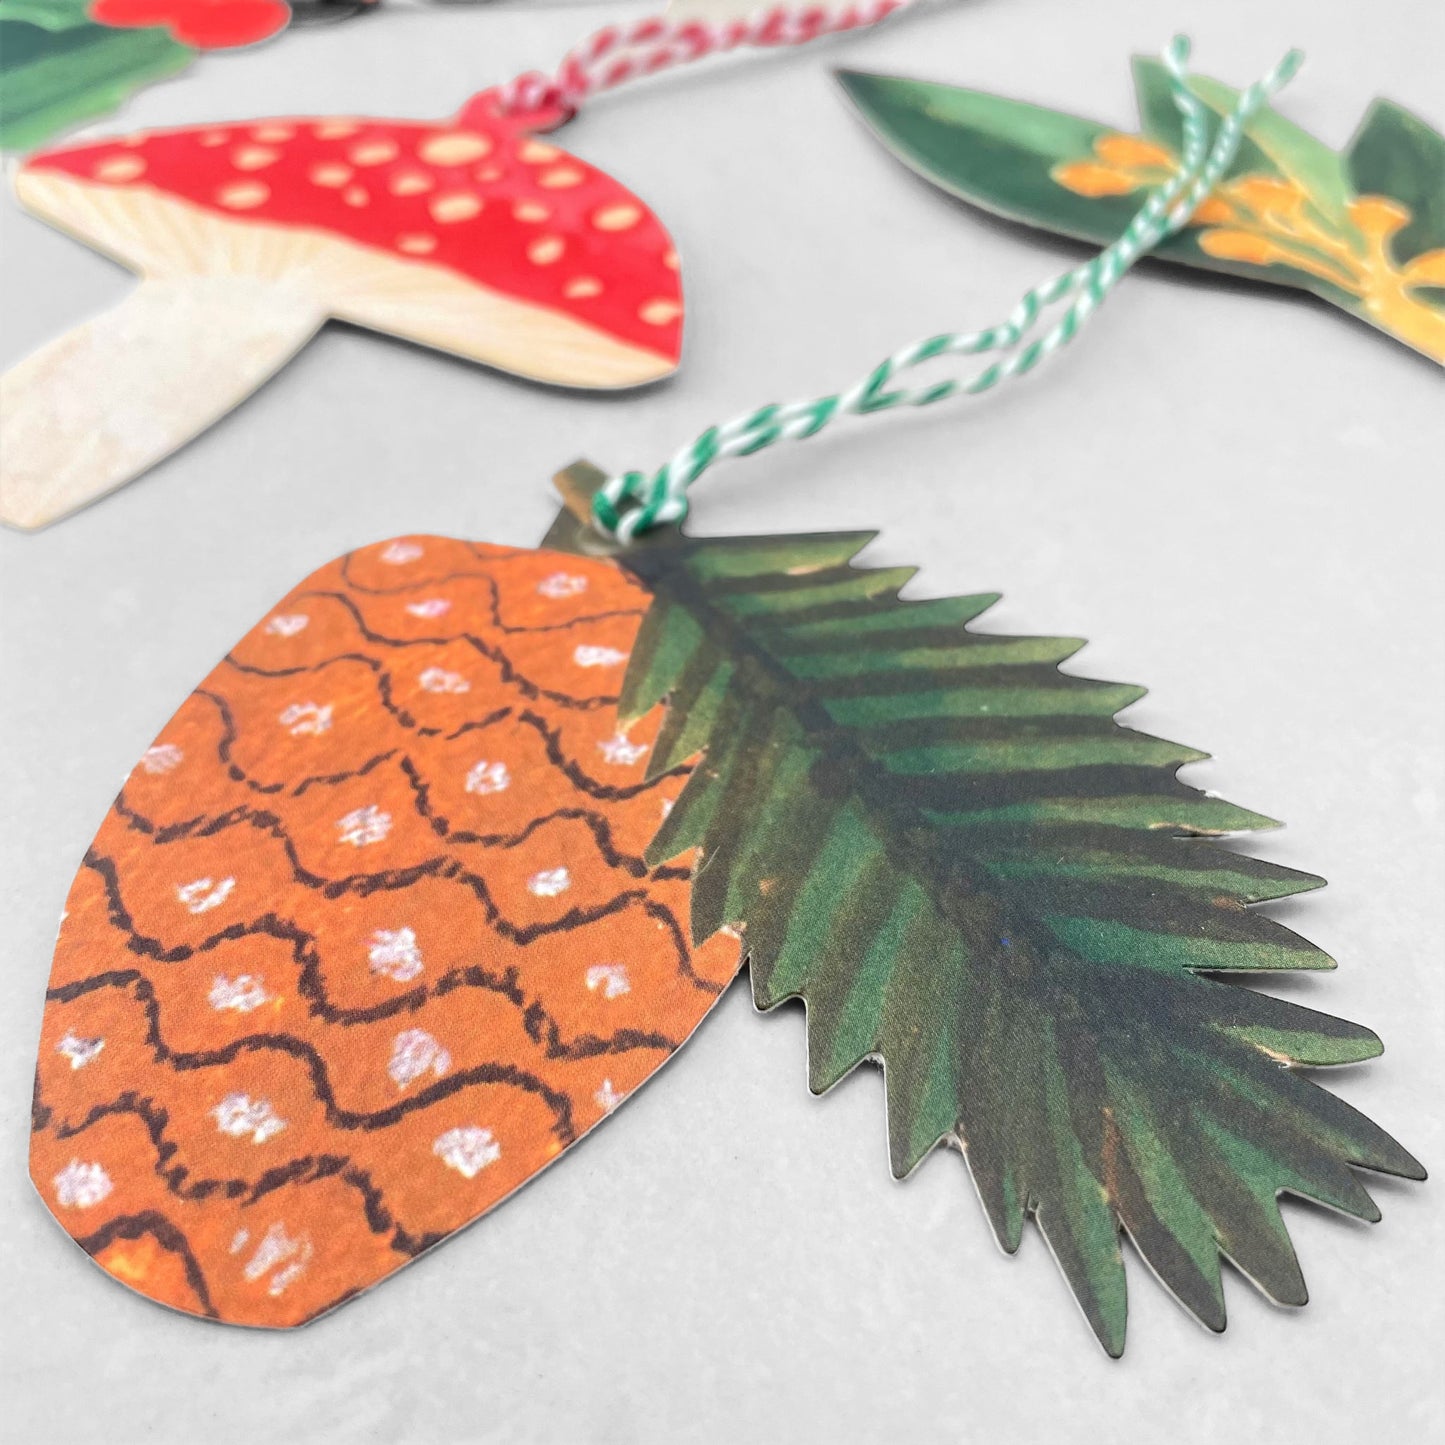 A set of five different festive plant gift tags in red, green and yellow with colourful sttring, by Hadley Paper Goods, pictured a pine cone